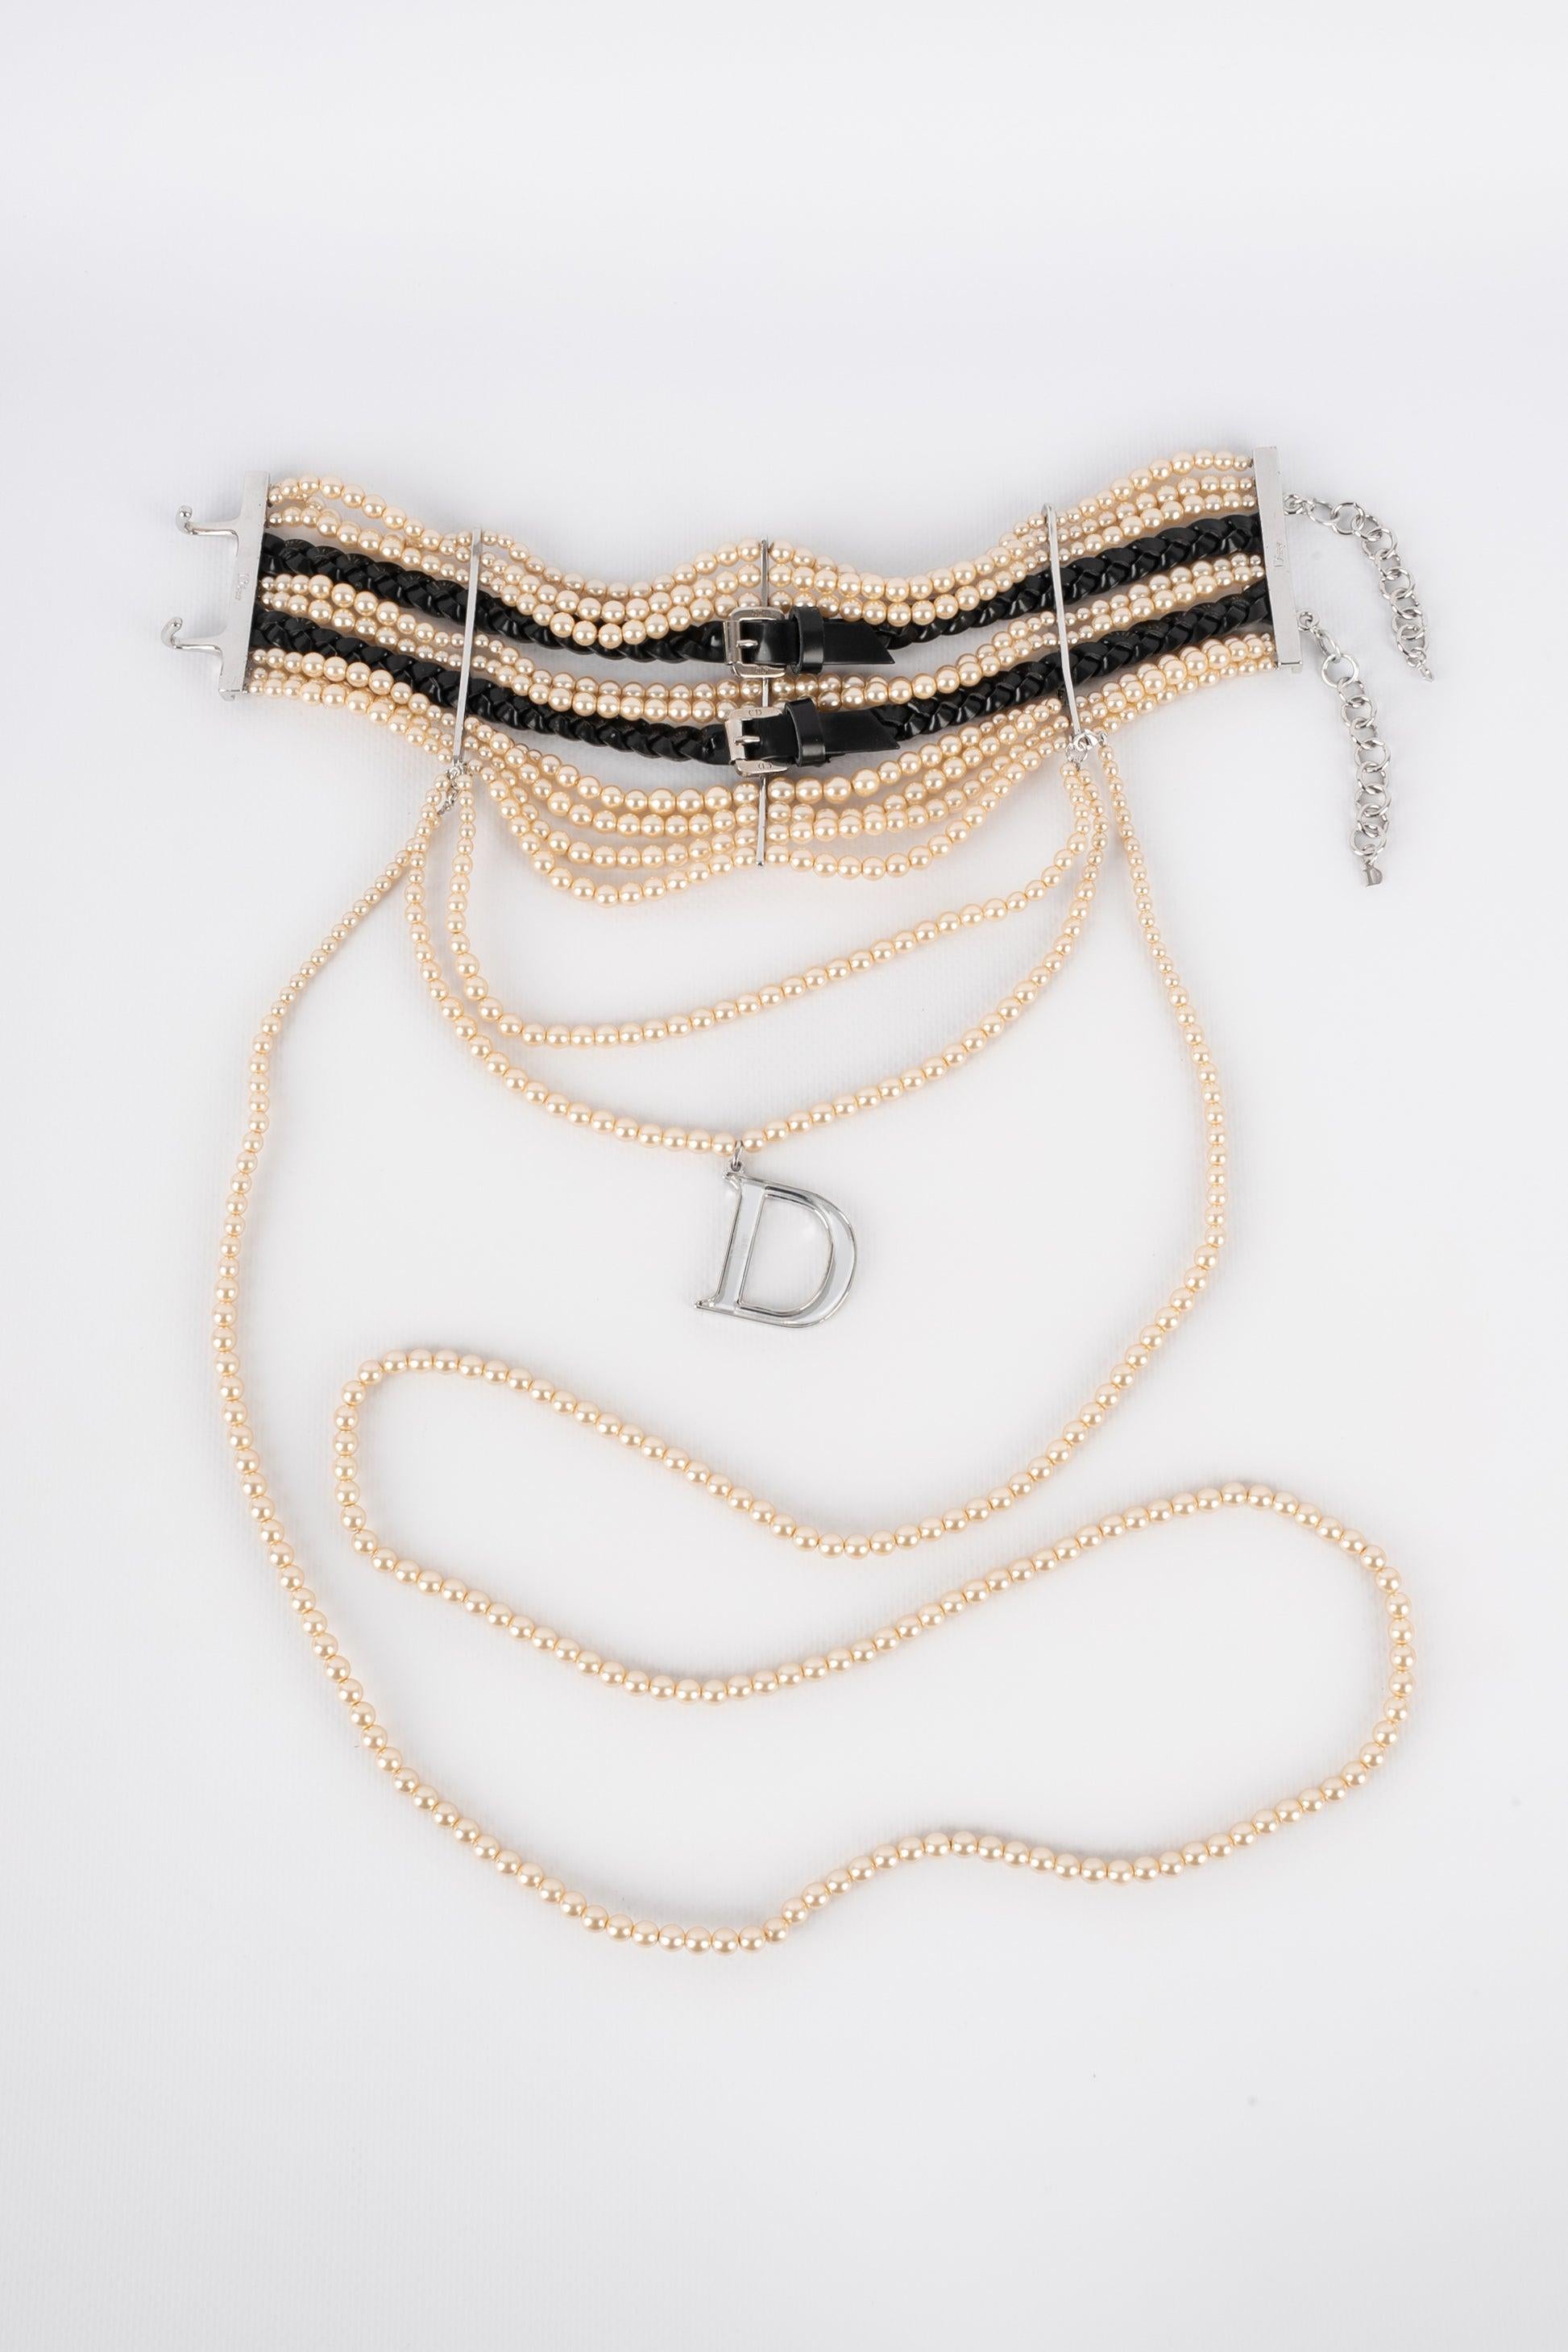 Christian Dior Massaï Necklace with Pearls and Black Leather, 2004 7